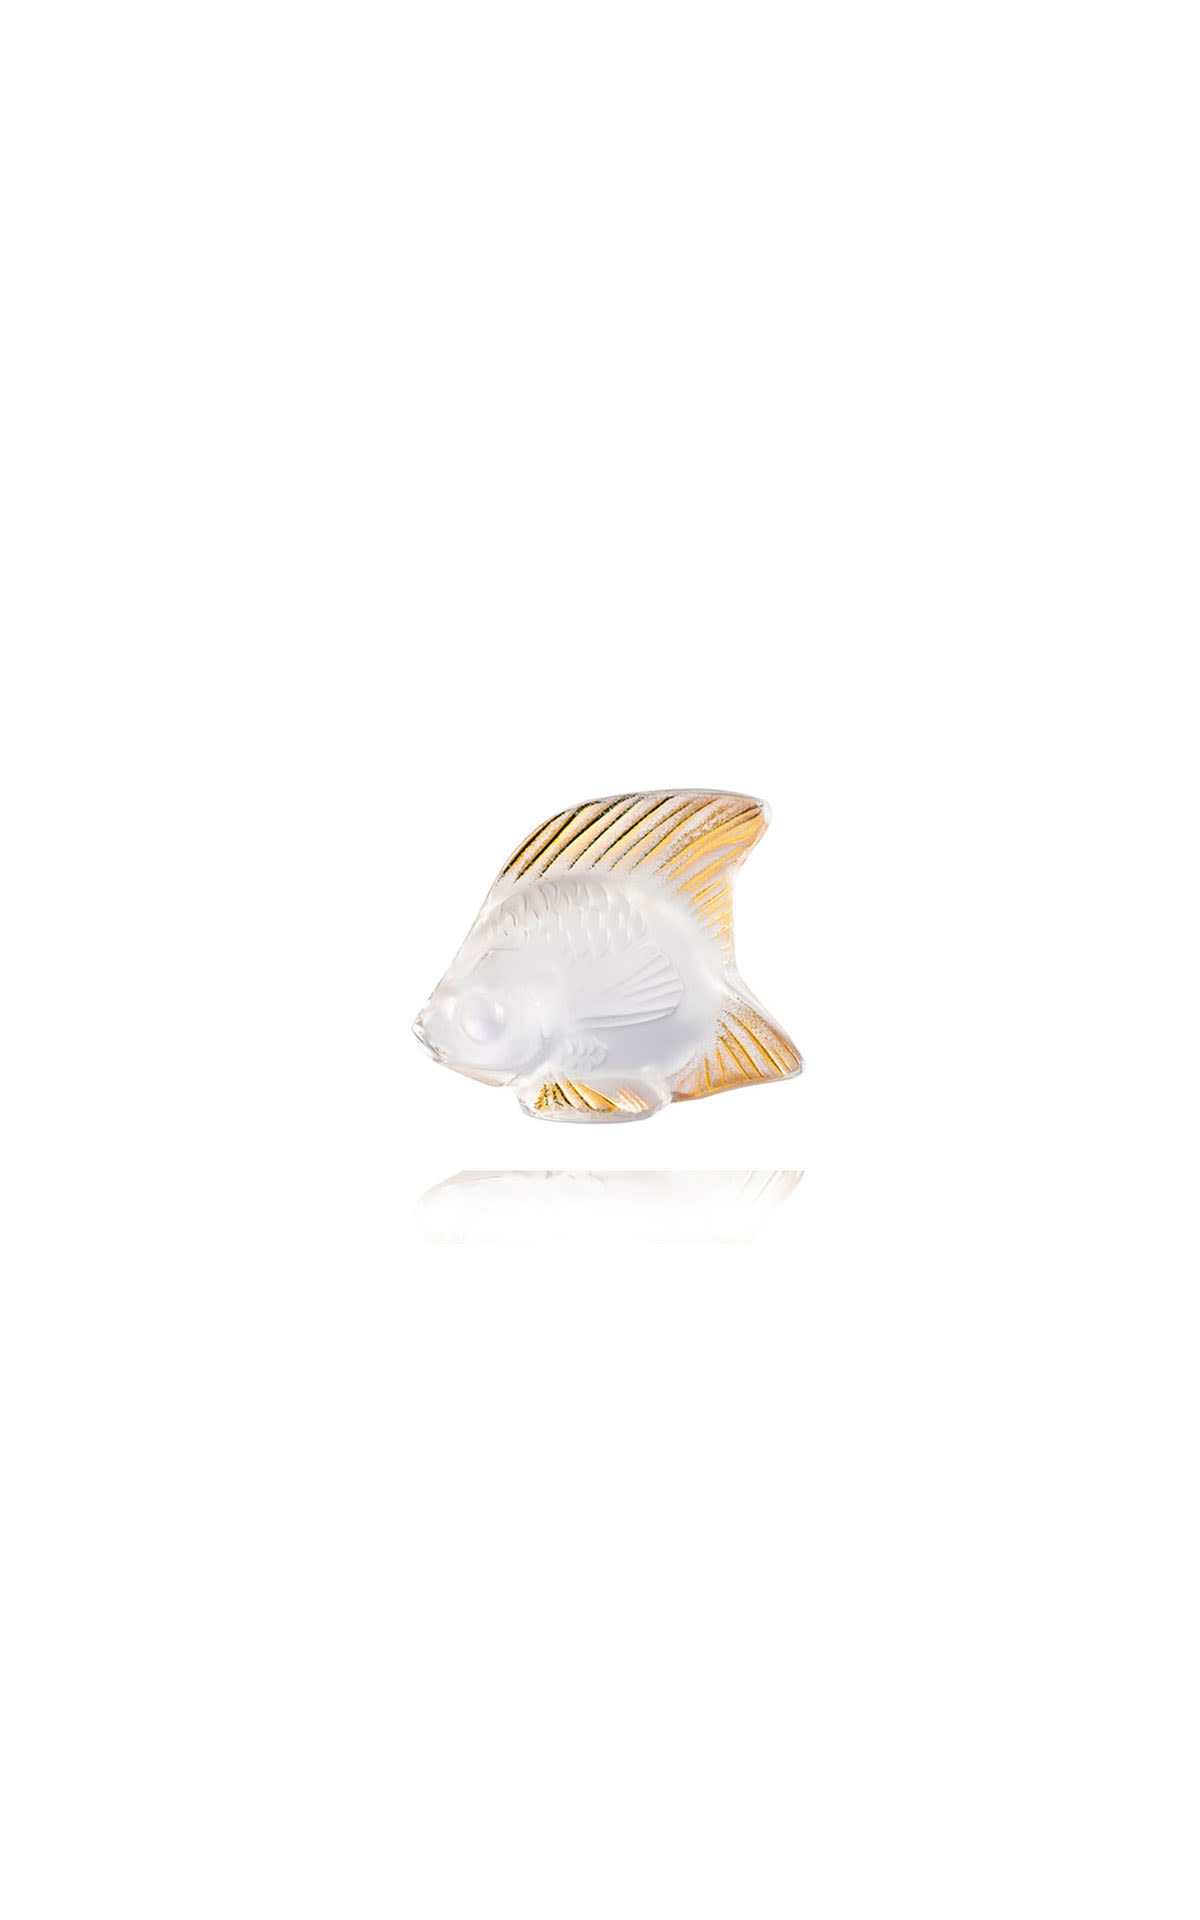 Lalique Fish sculpture gold stamp  from Bicester Village